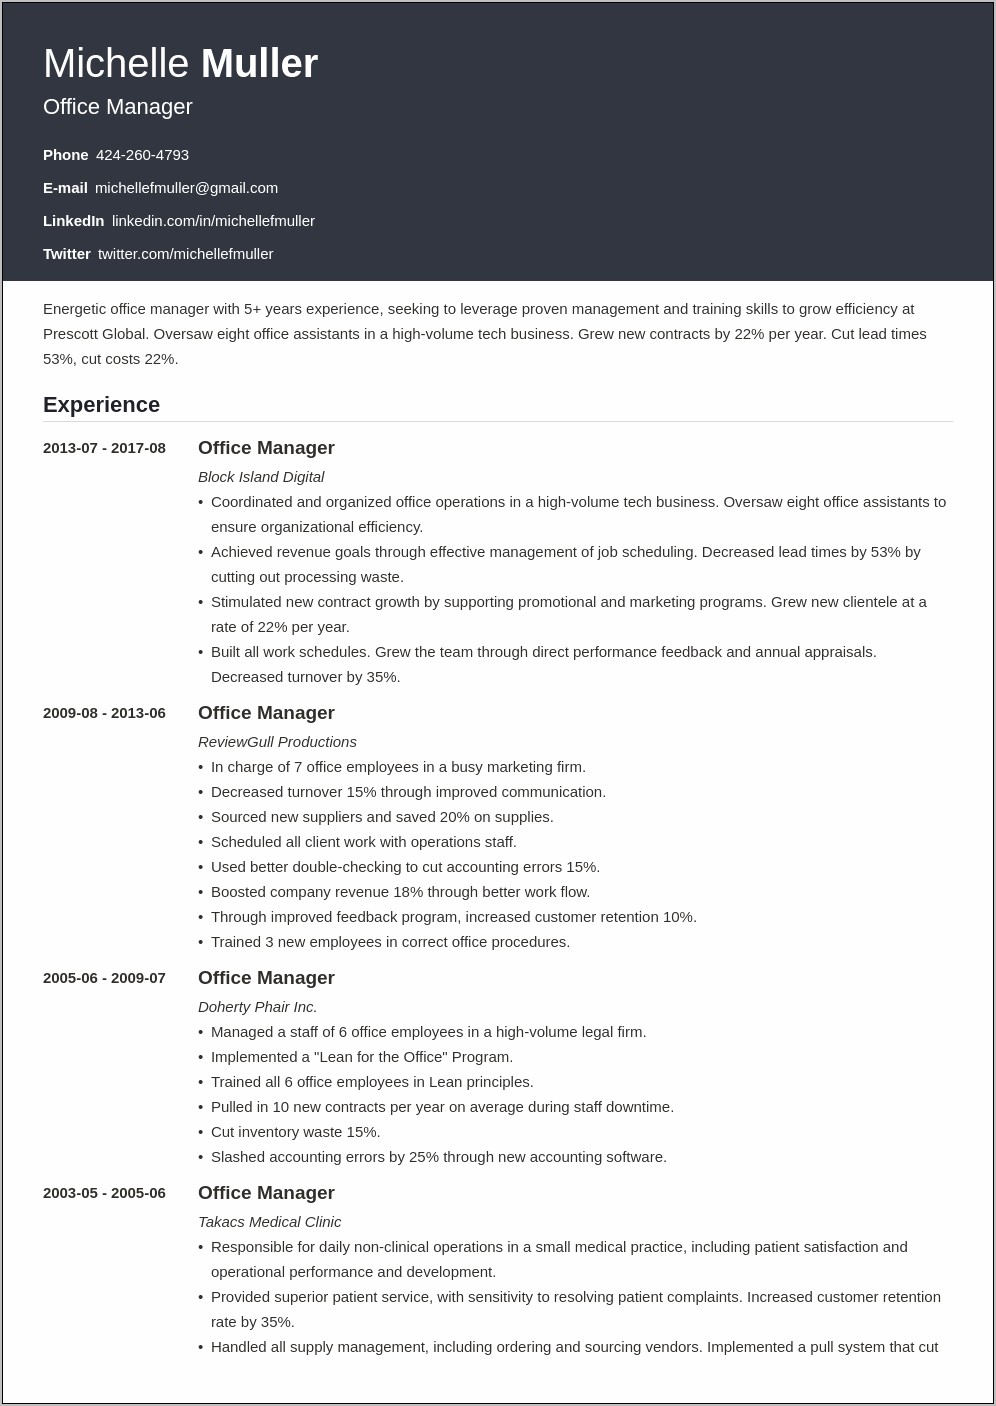 Resume Template With One Company And Multiple Jobs